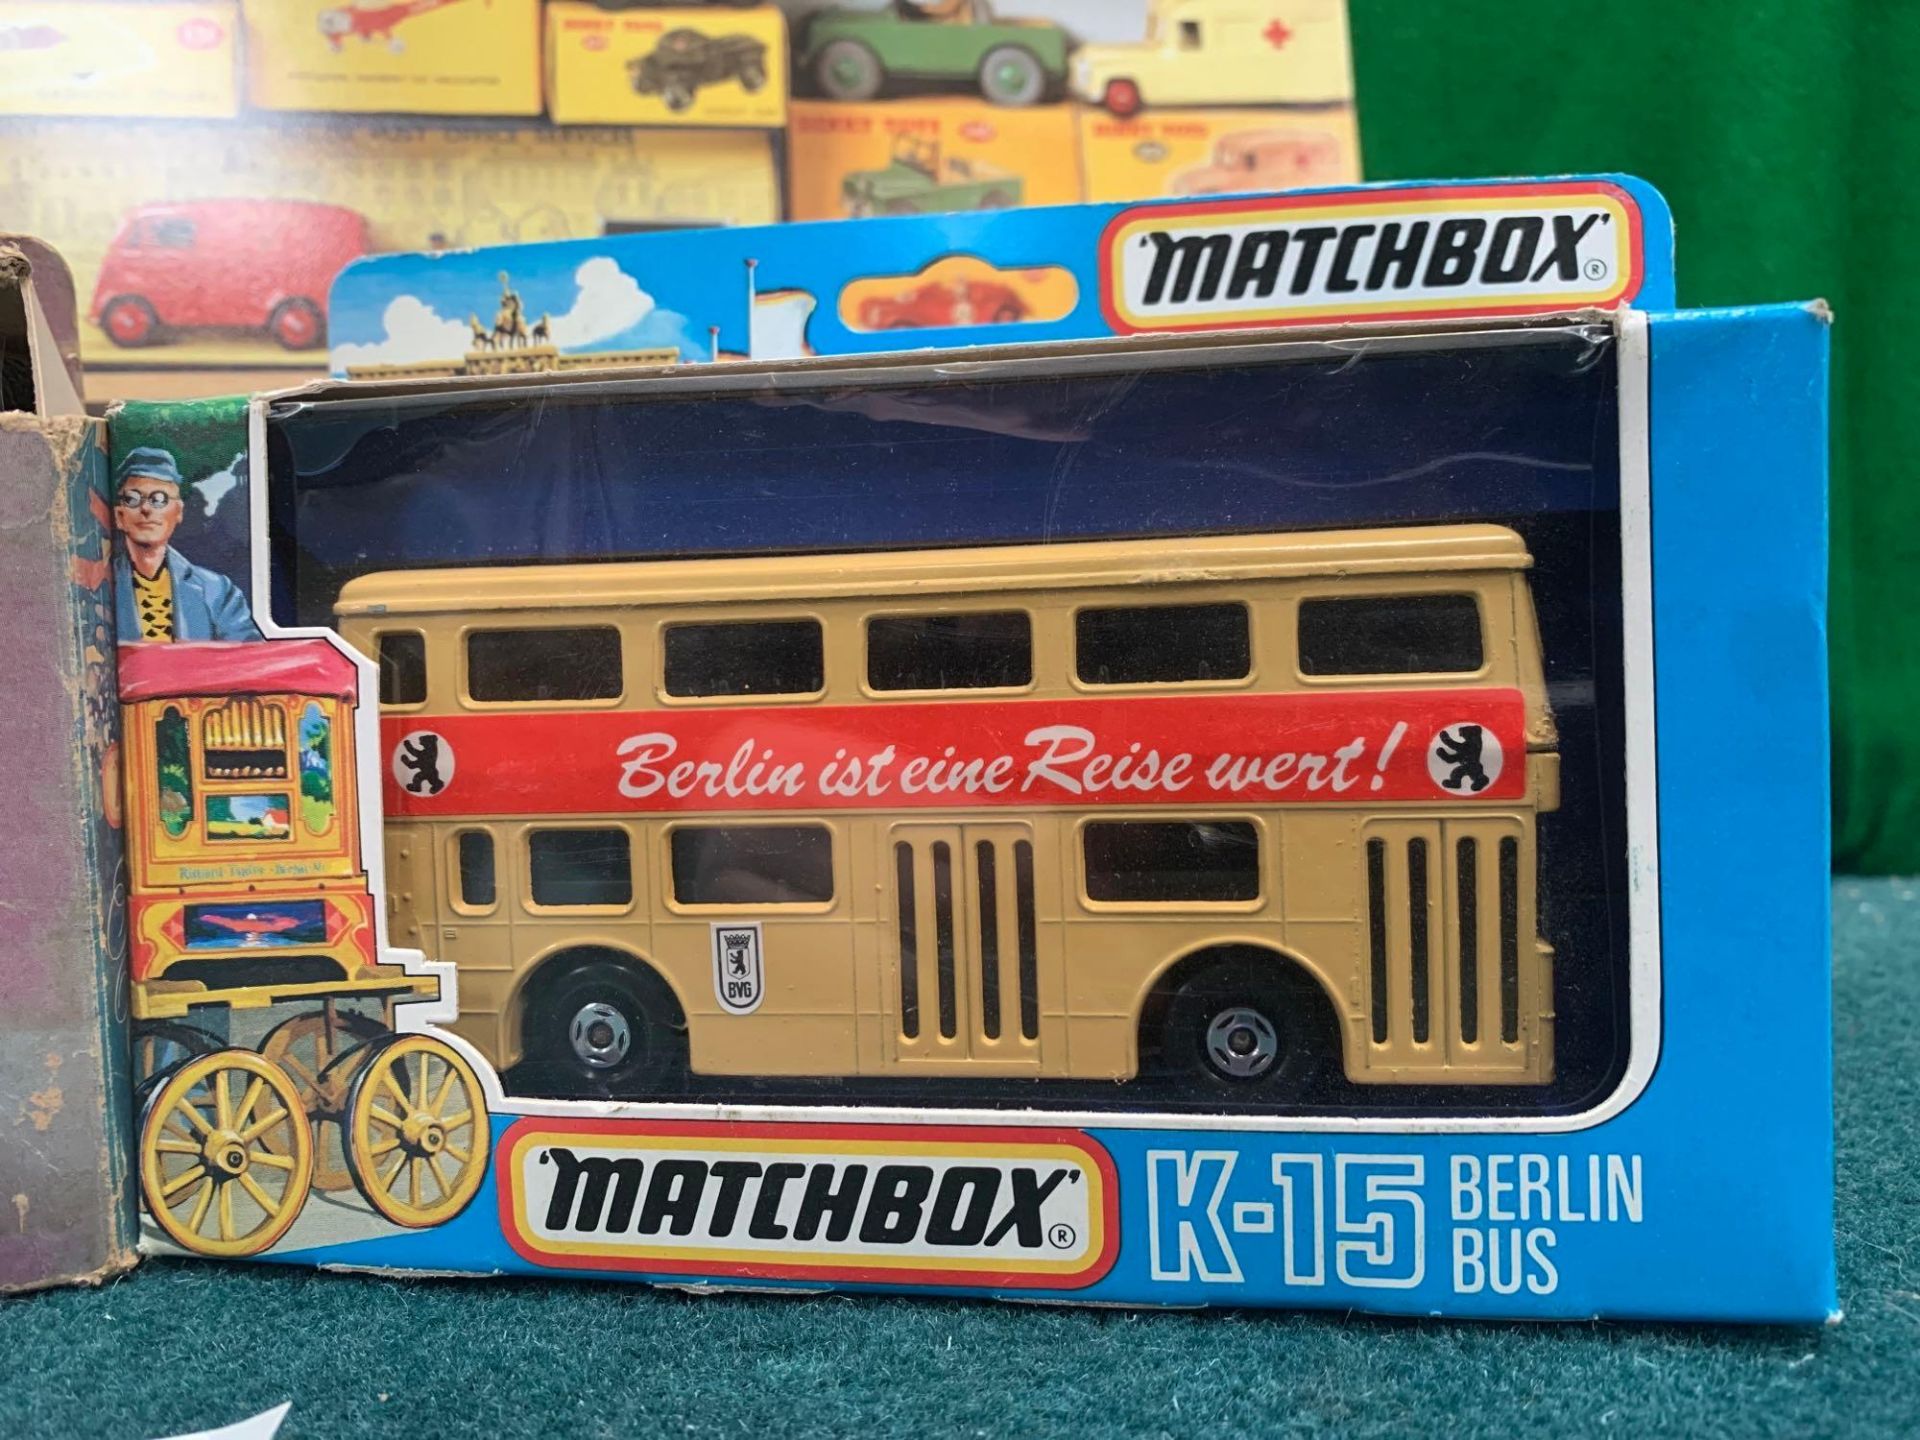 2 X Matchbox Buses The Royal Wedding 1981 To Commemorate The Marriage Of The Prince Of Wales And - Image 6 of 6